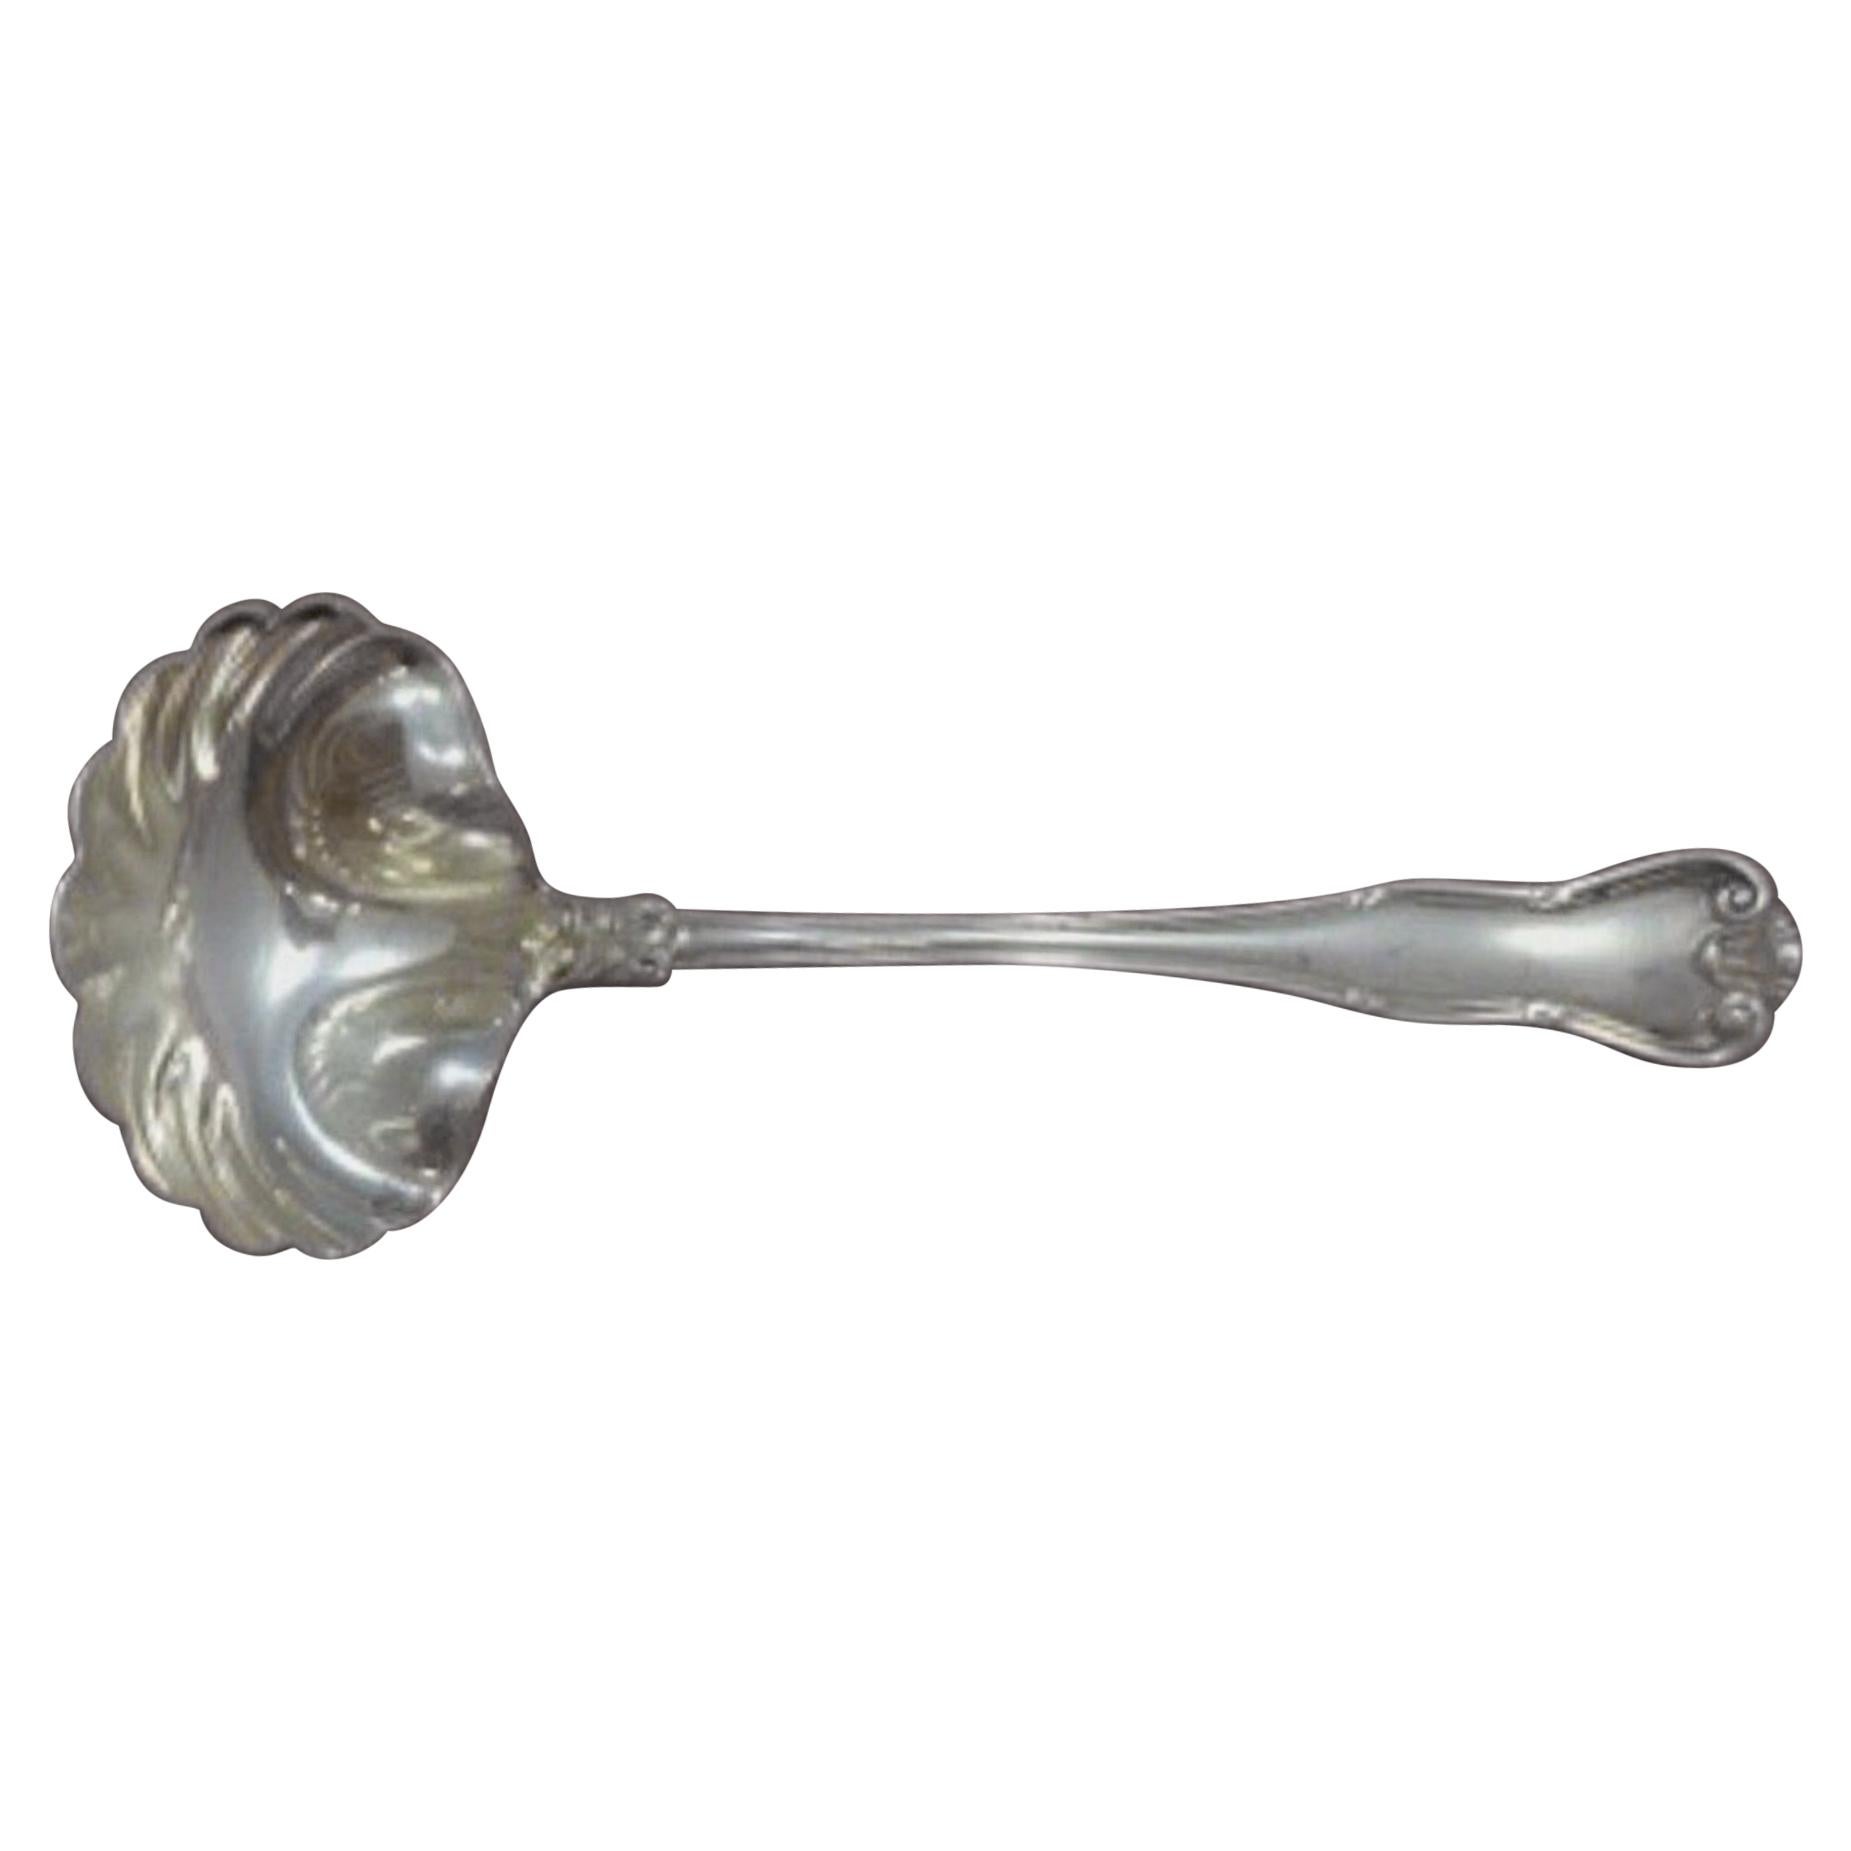 Provence by Tiffany & Co. Sterling Silver Gravy Ladle Serving